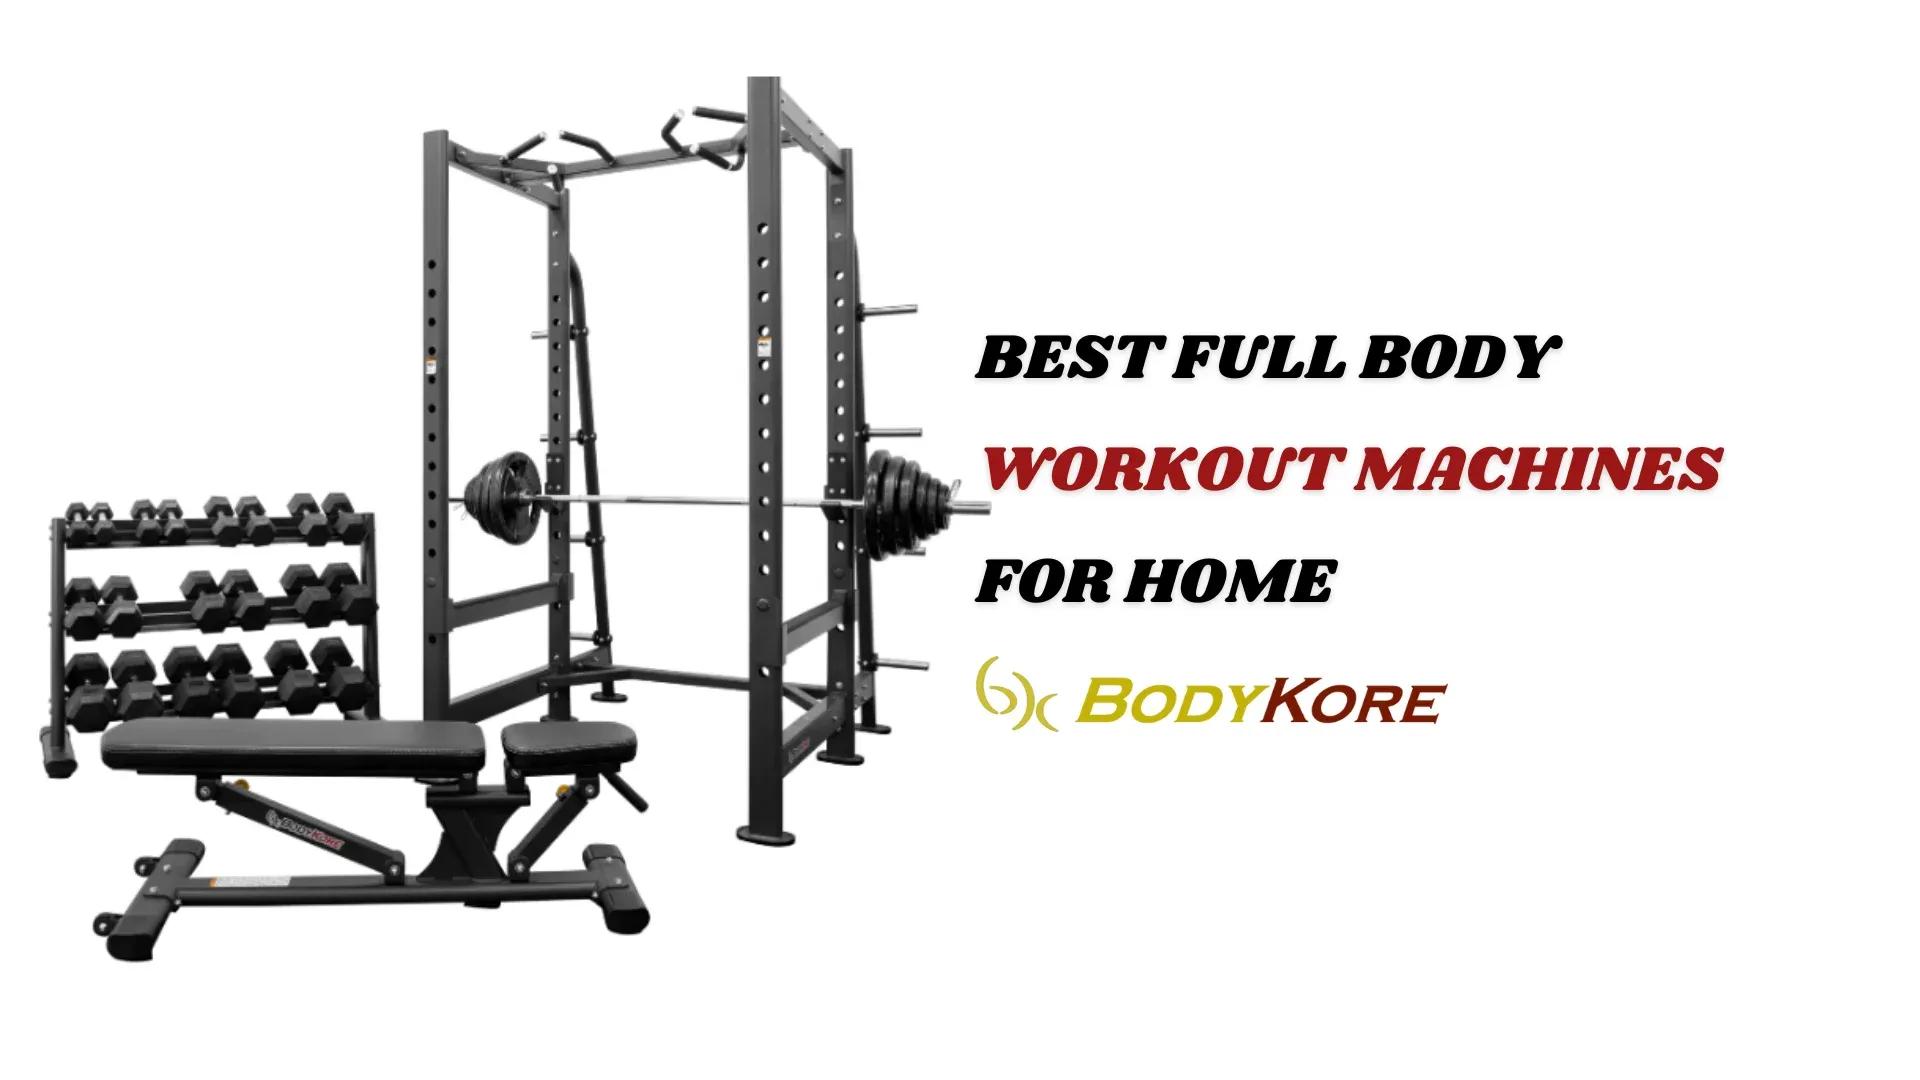 Best Full Body Workout Machines for Home: Ultimate Fitness